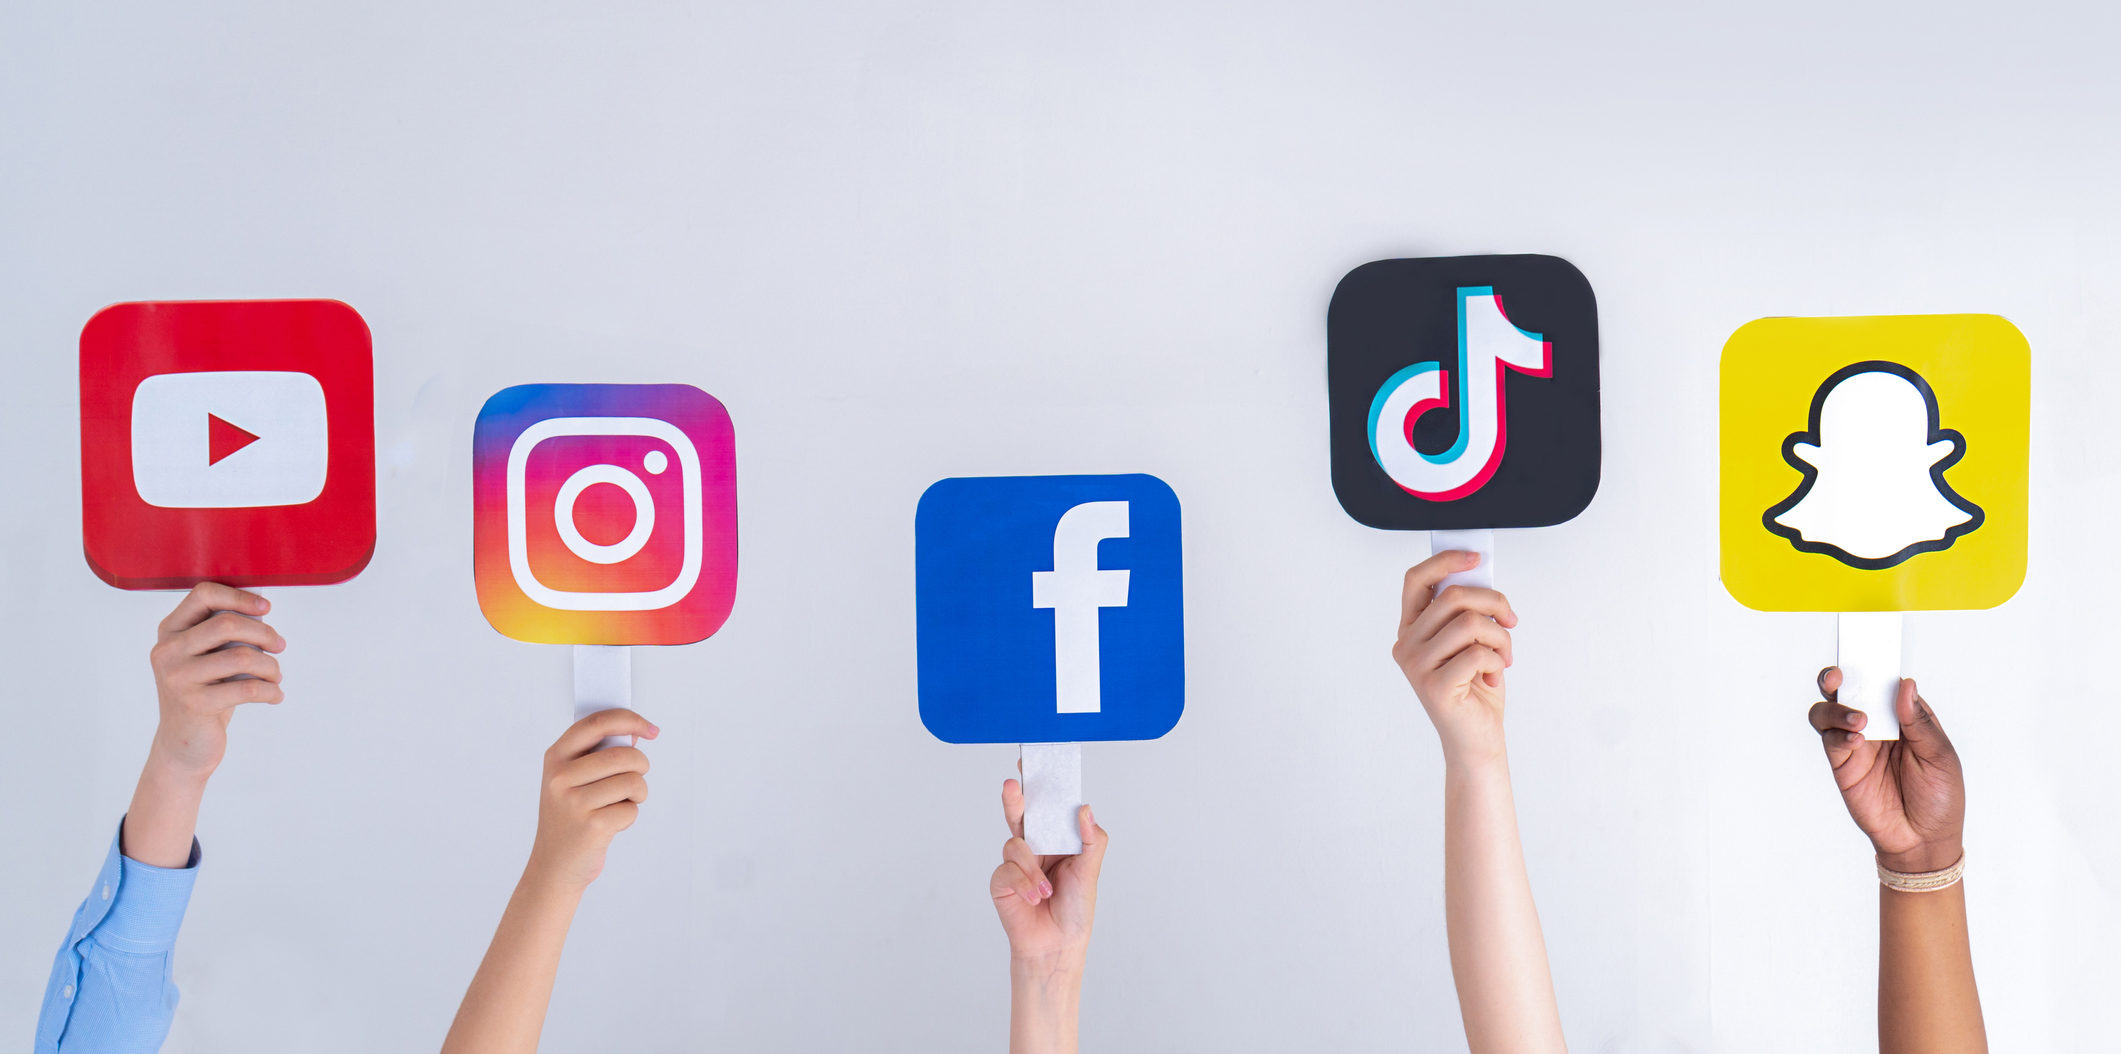 Social Media: Why You Need It & What to Avoid